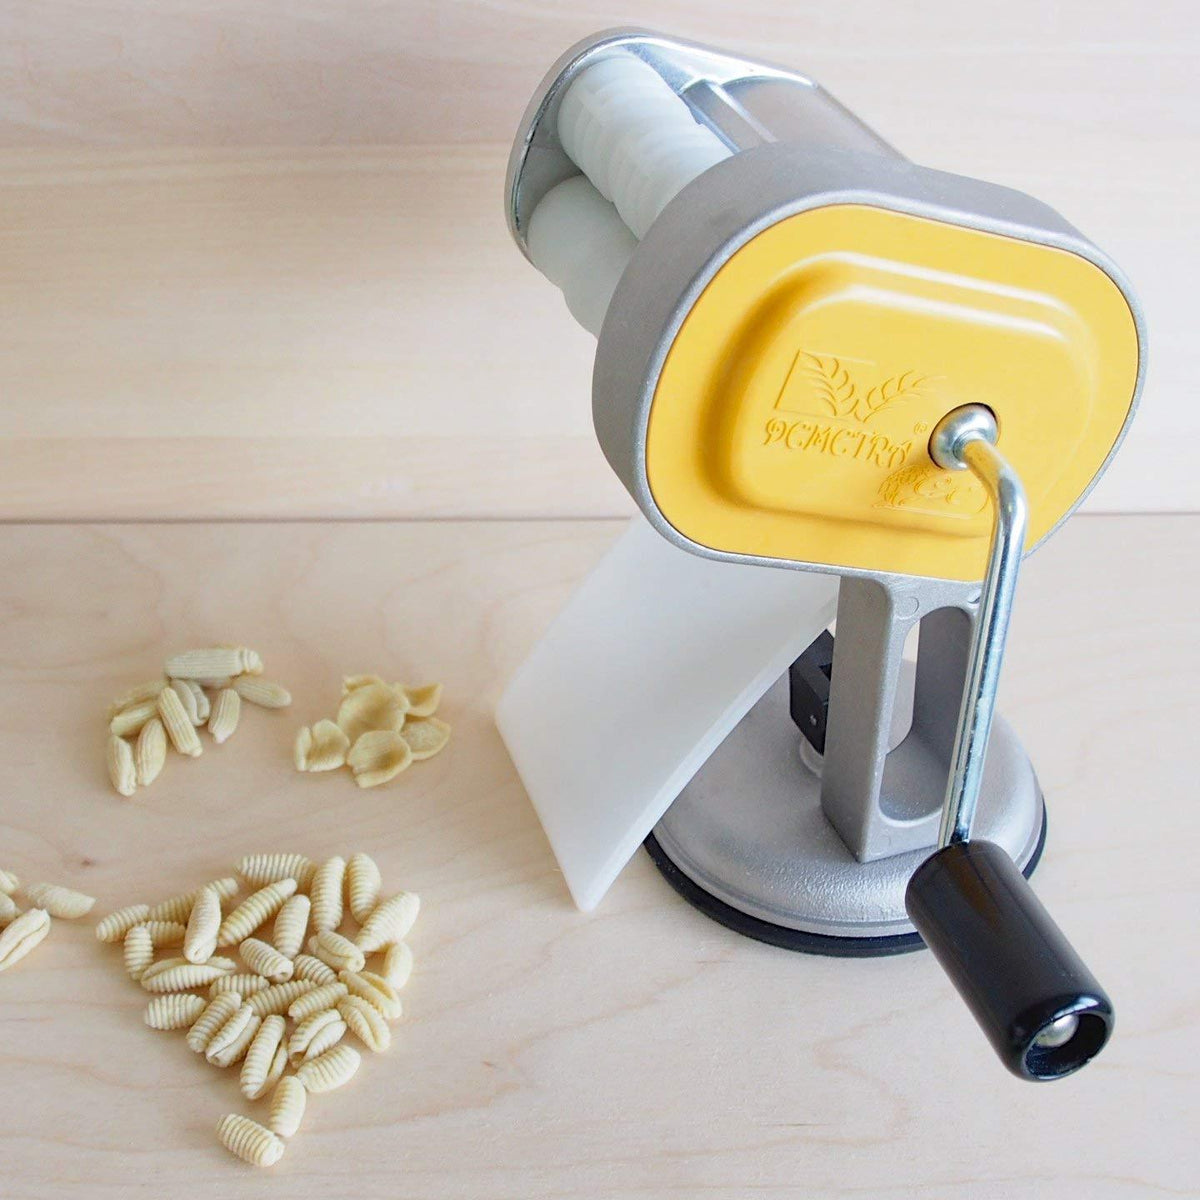 Cookistry's Kitchen Gadget and Food Reviews: How to Use a Cavatelli Maker